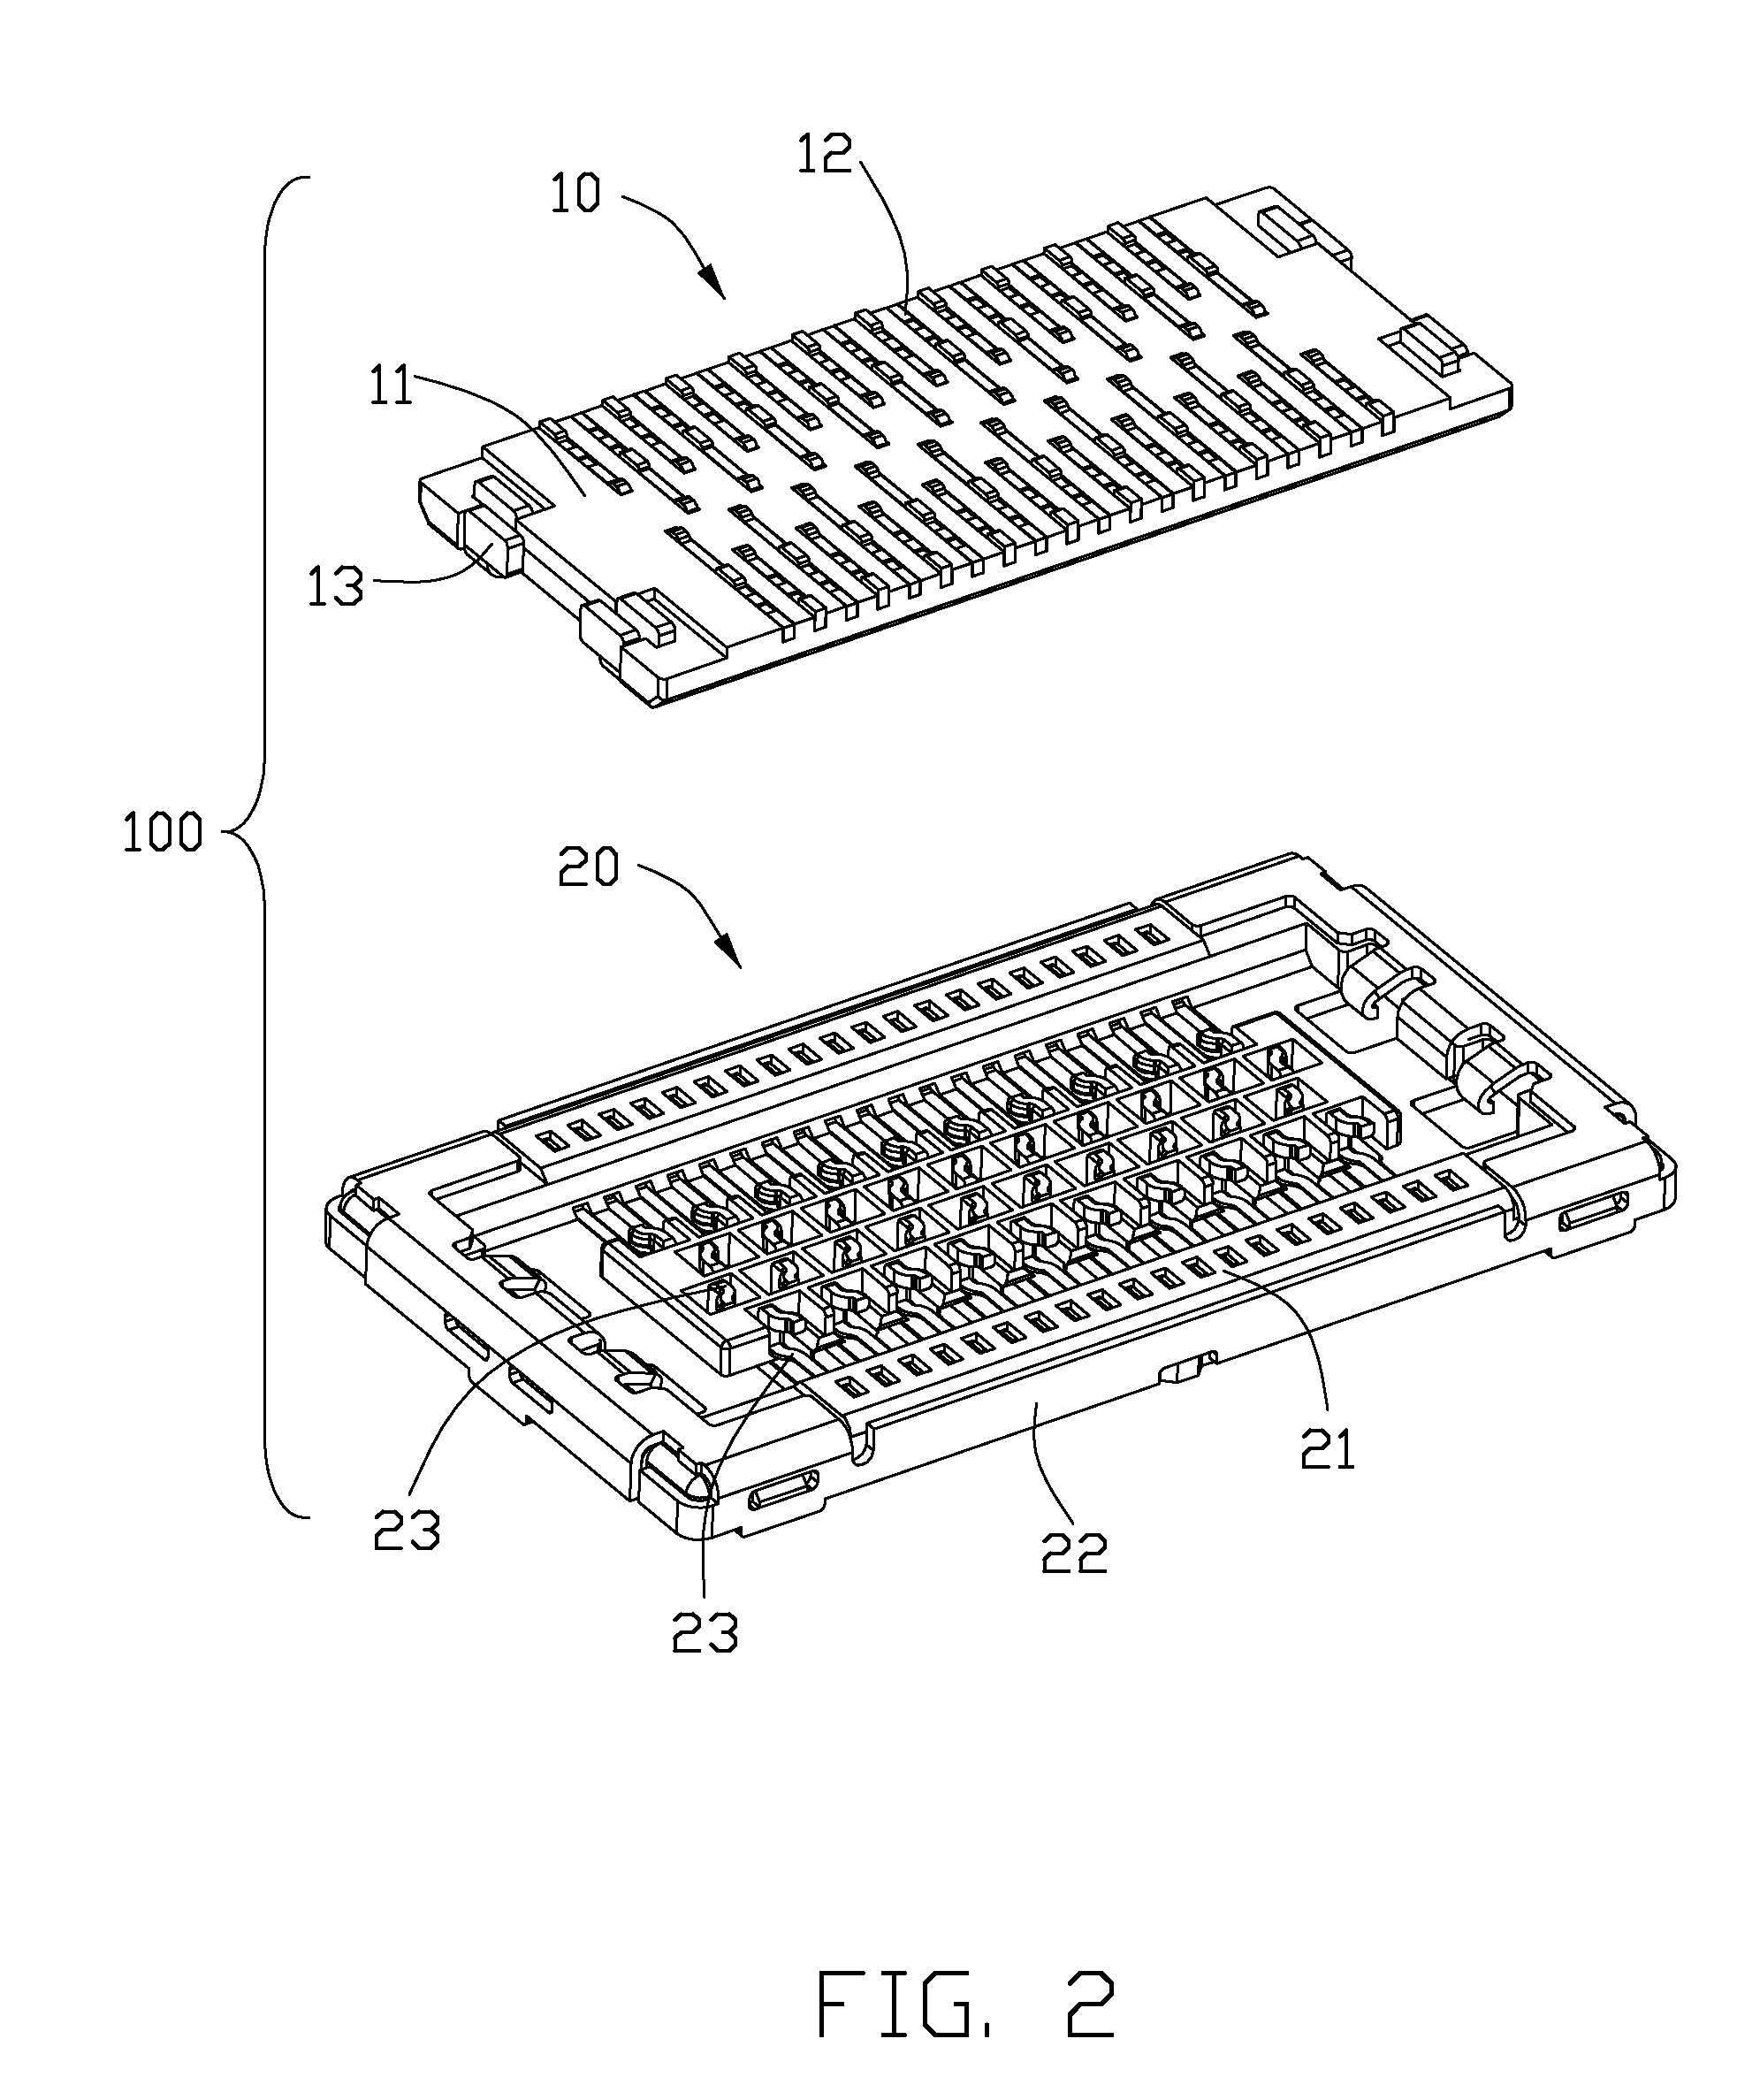 Board to board connector assembly having improved plug and receptacle contacts